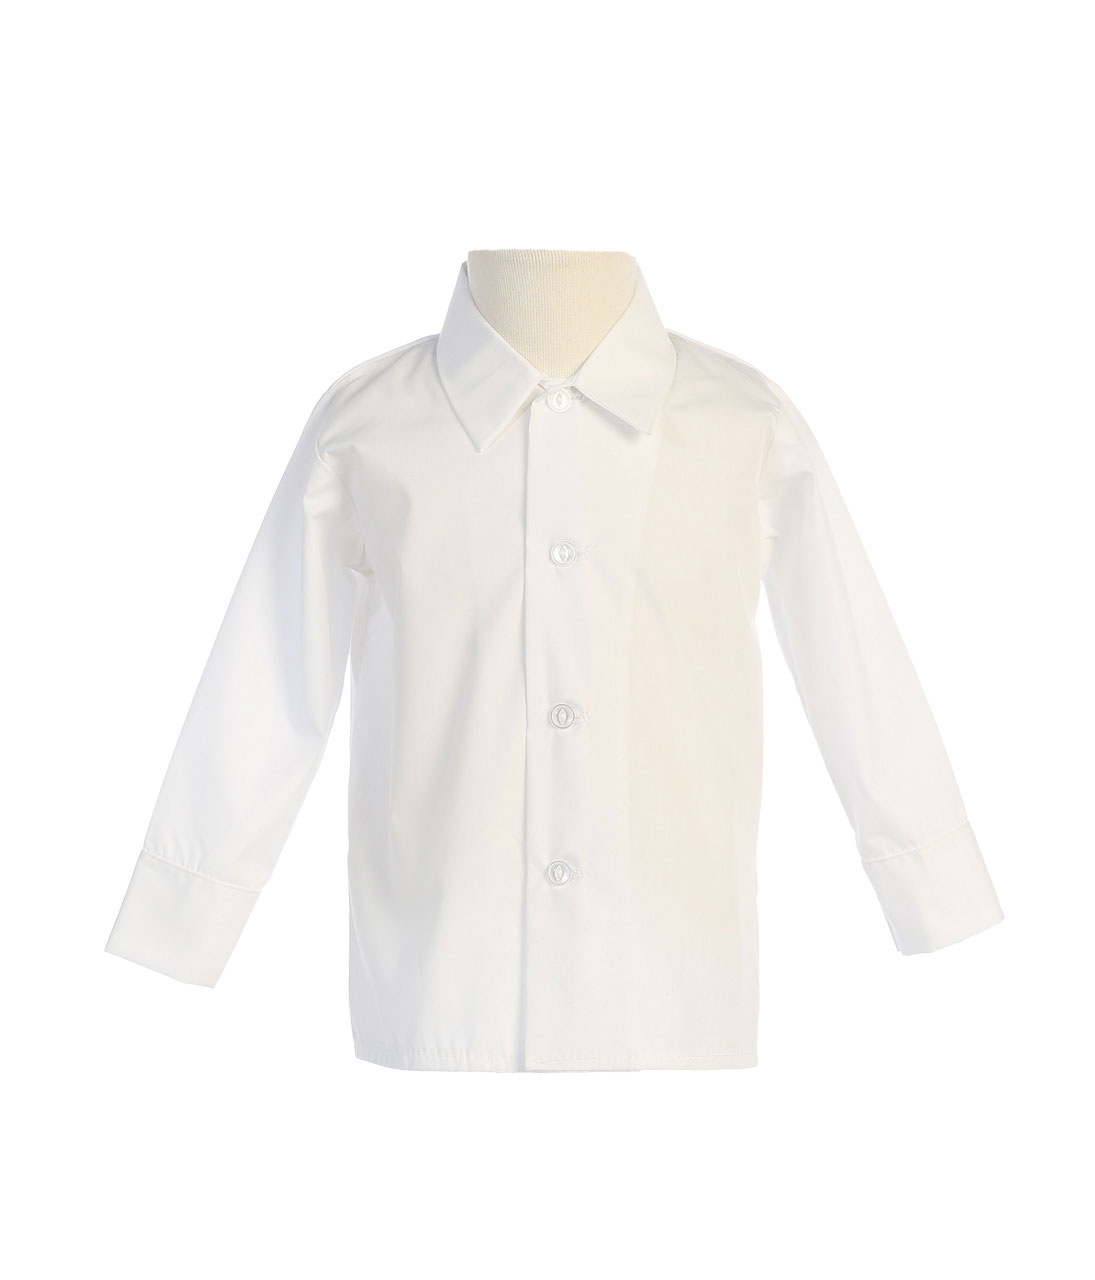 Boys Long Sleeved Simple Dress Shirt - Available in White 3T